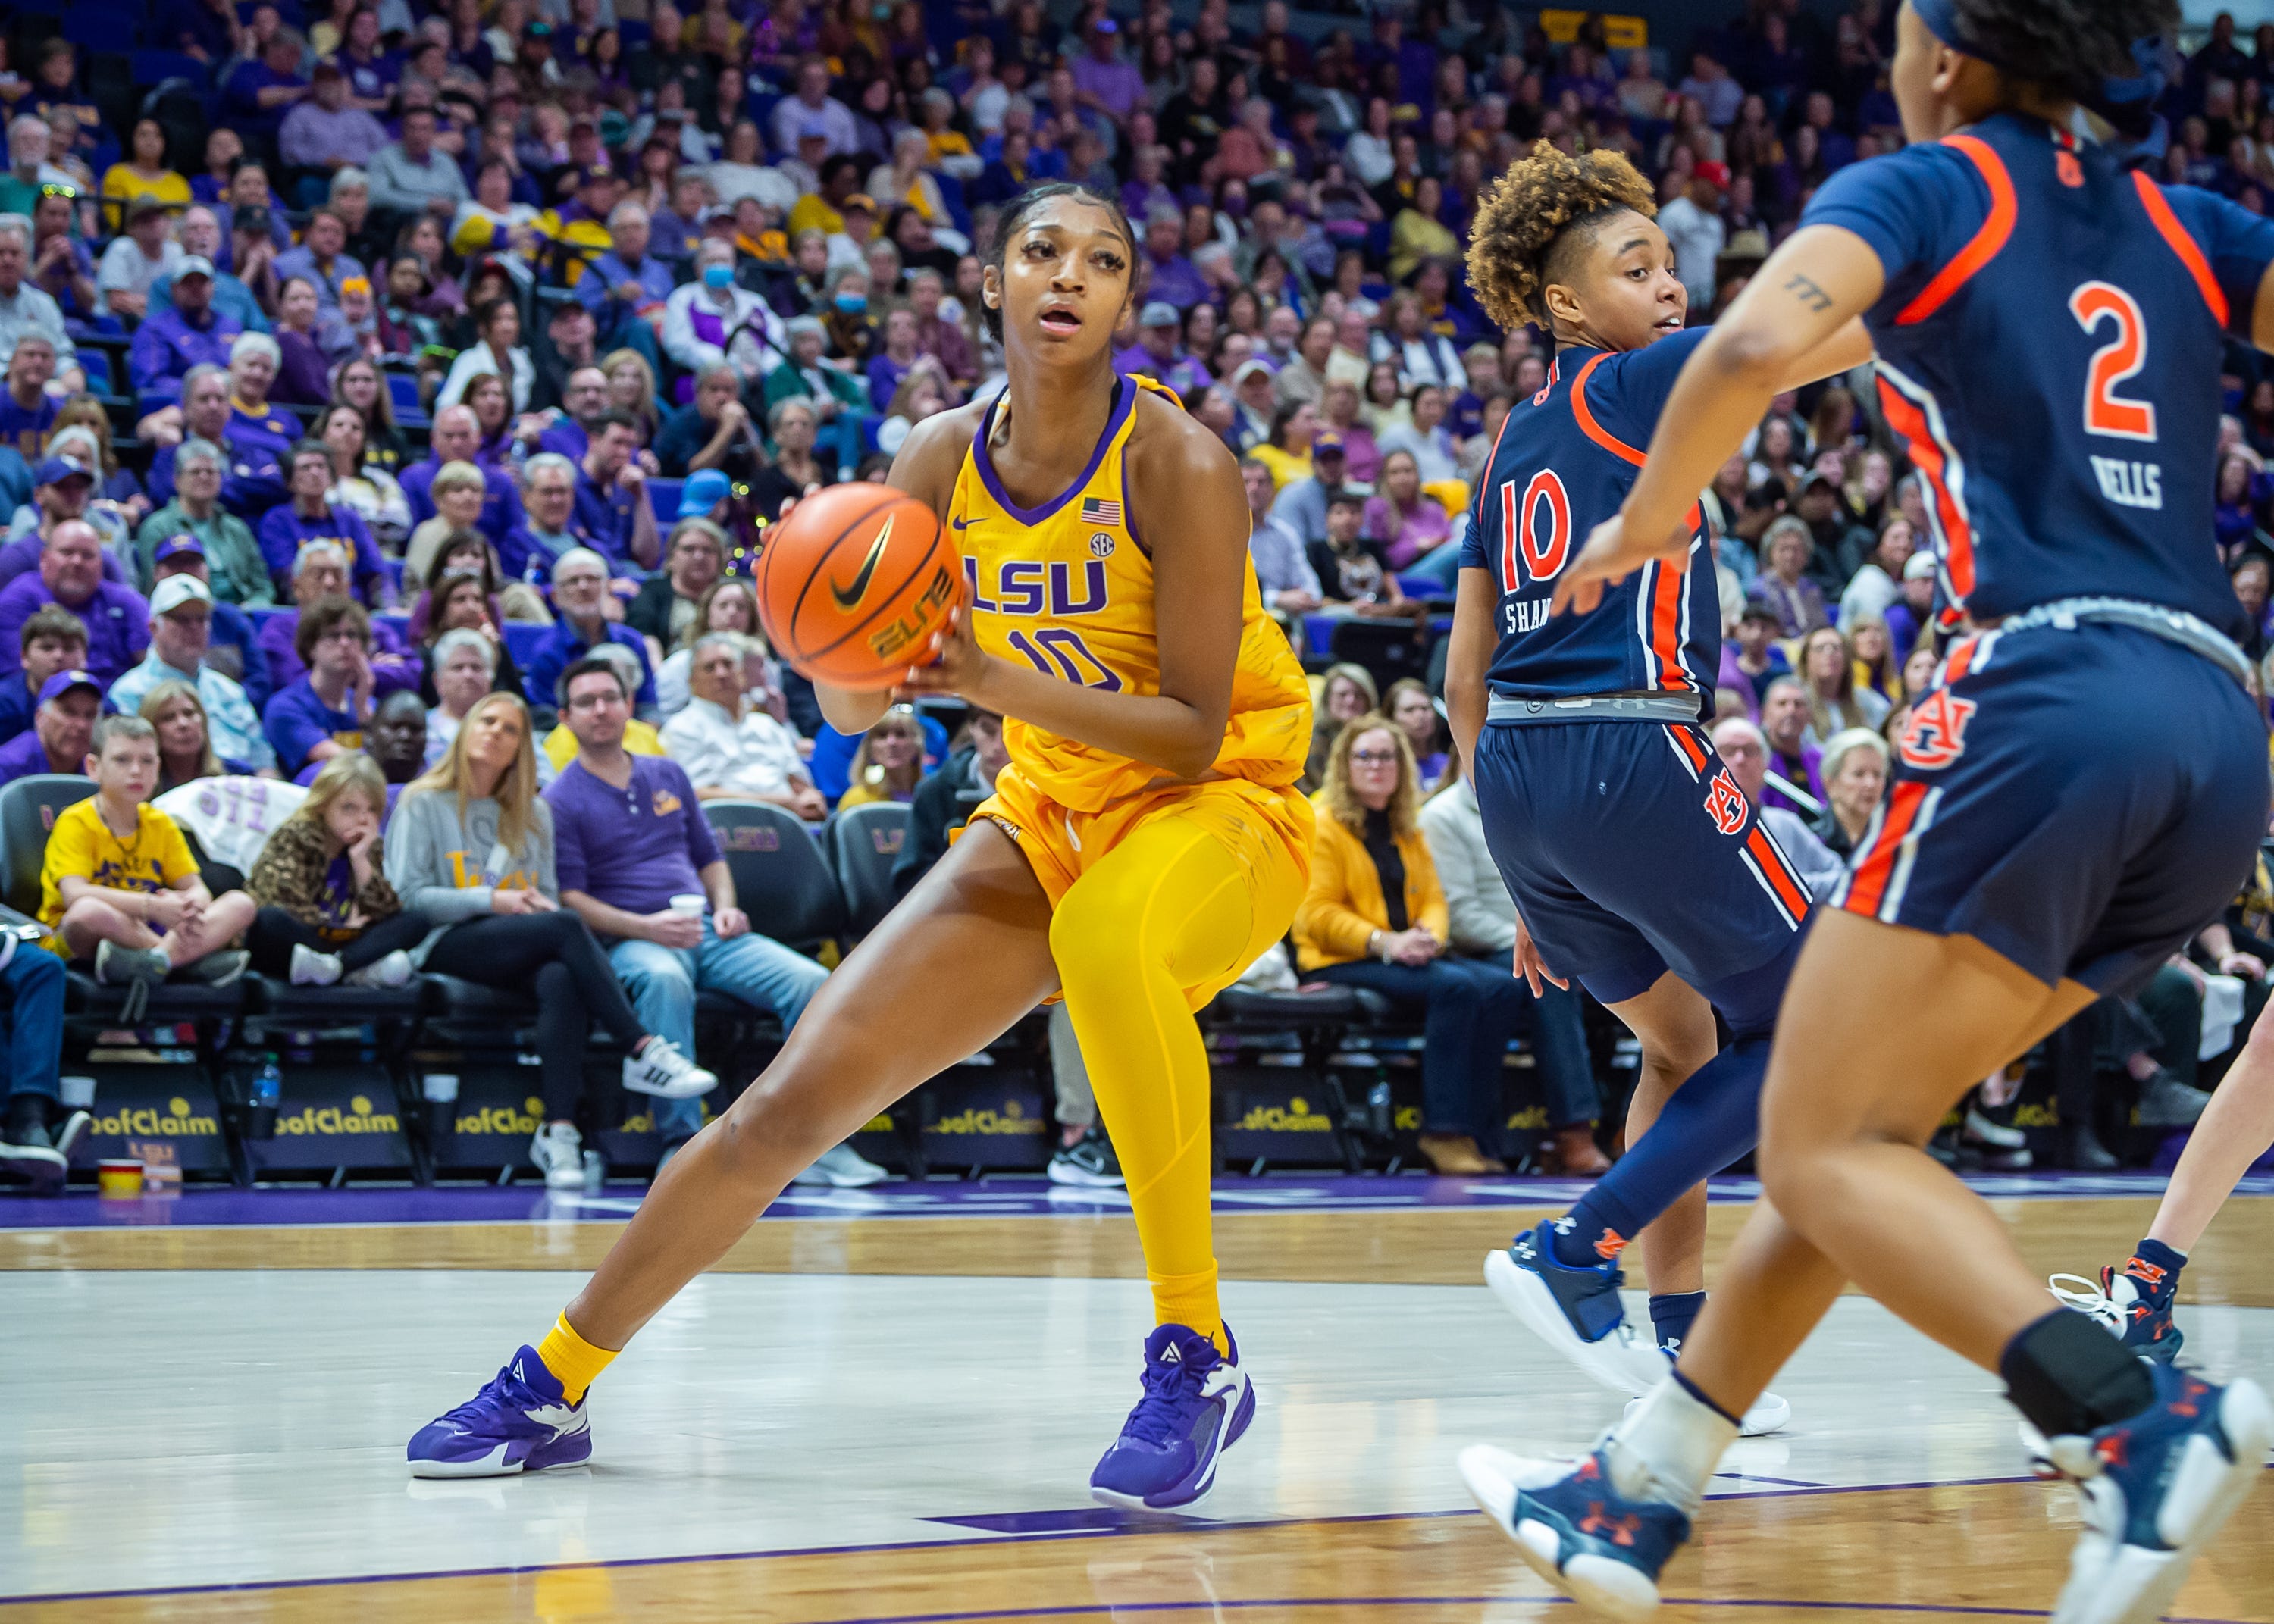 how to, how to buy no. 13 lsu vs. auburn women's college basketball tickets